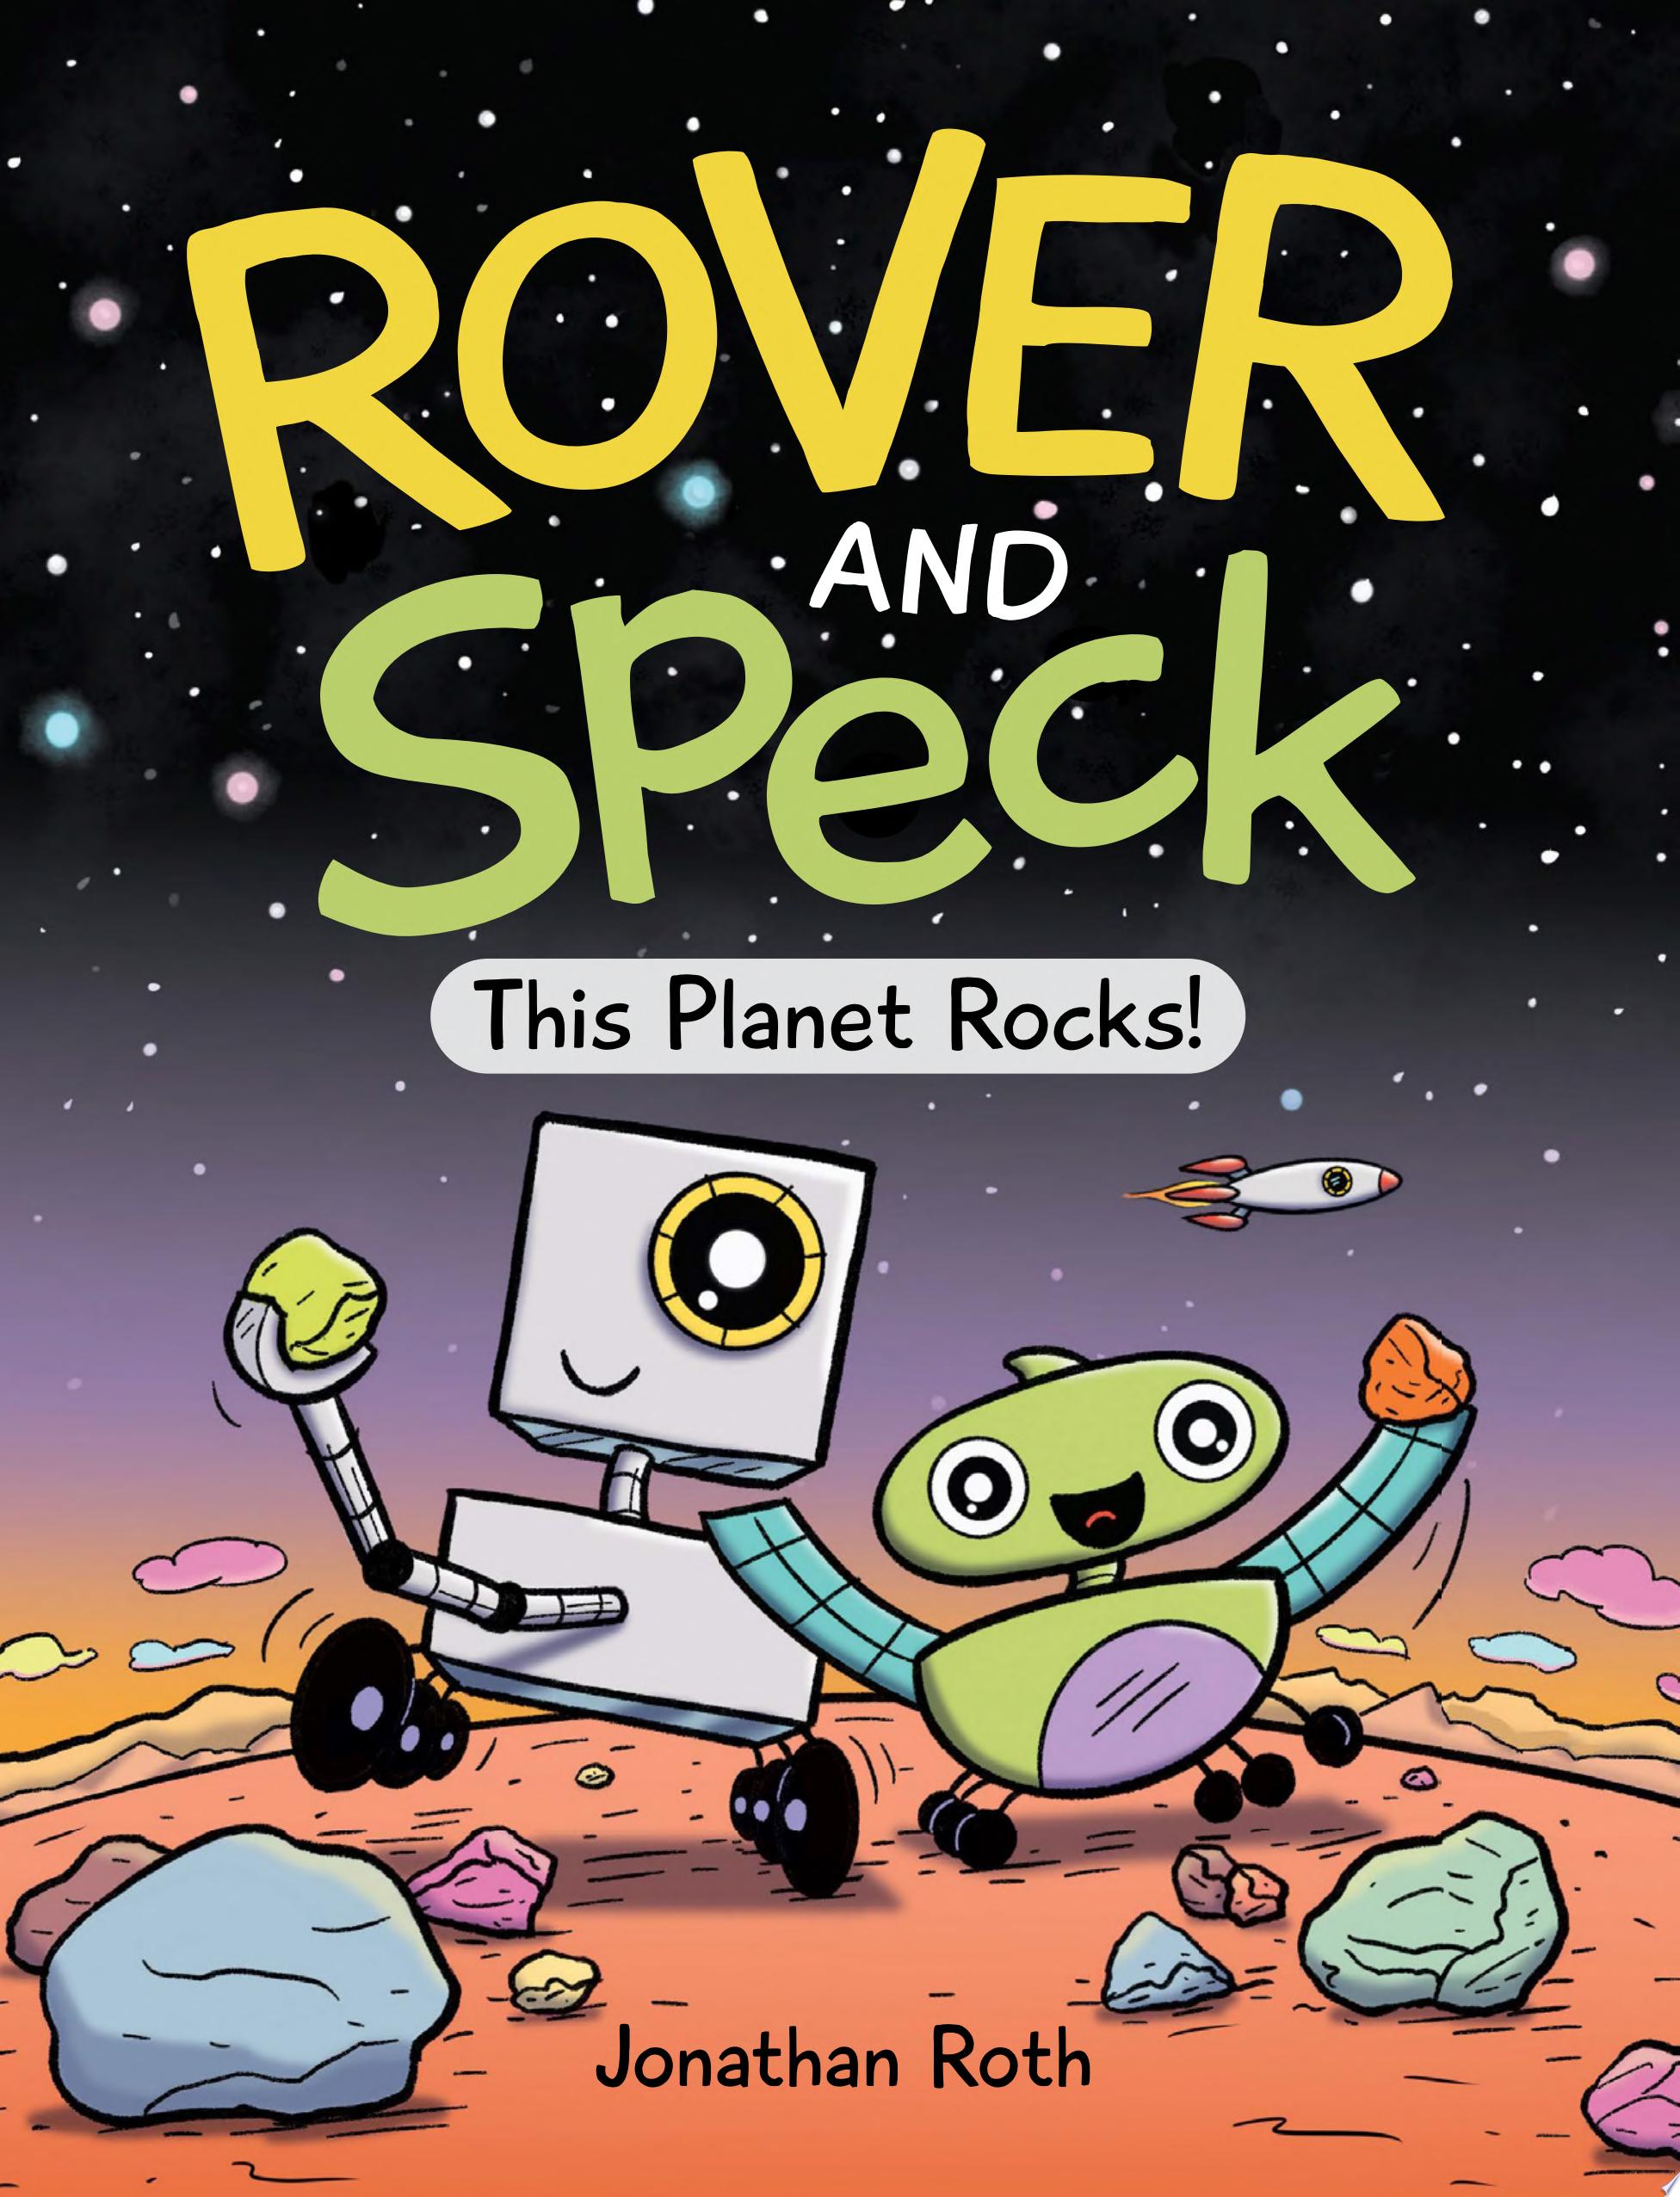 Image for "Rover and Speck: This Planet Rocks!"